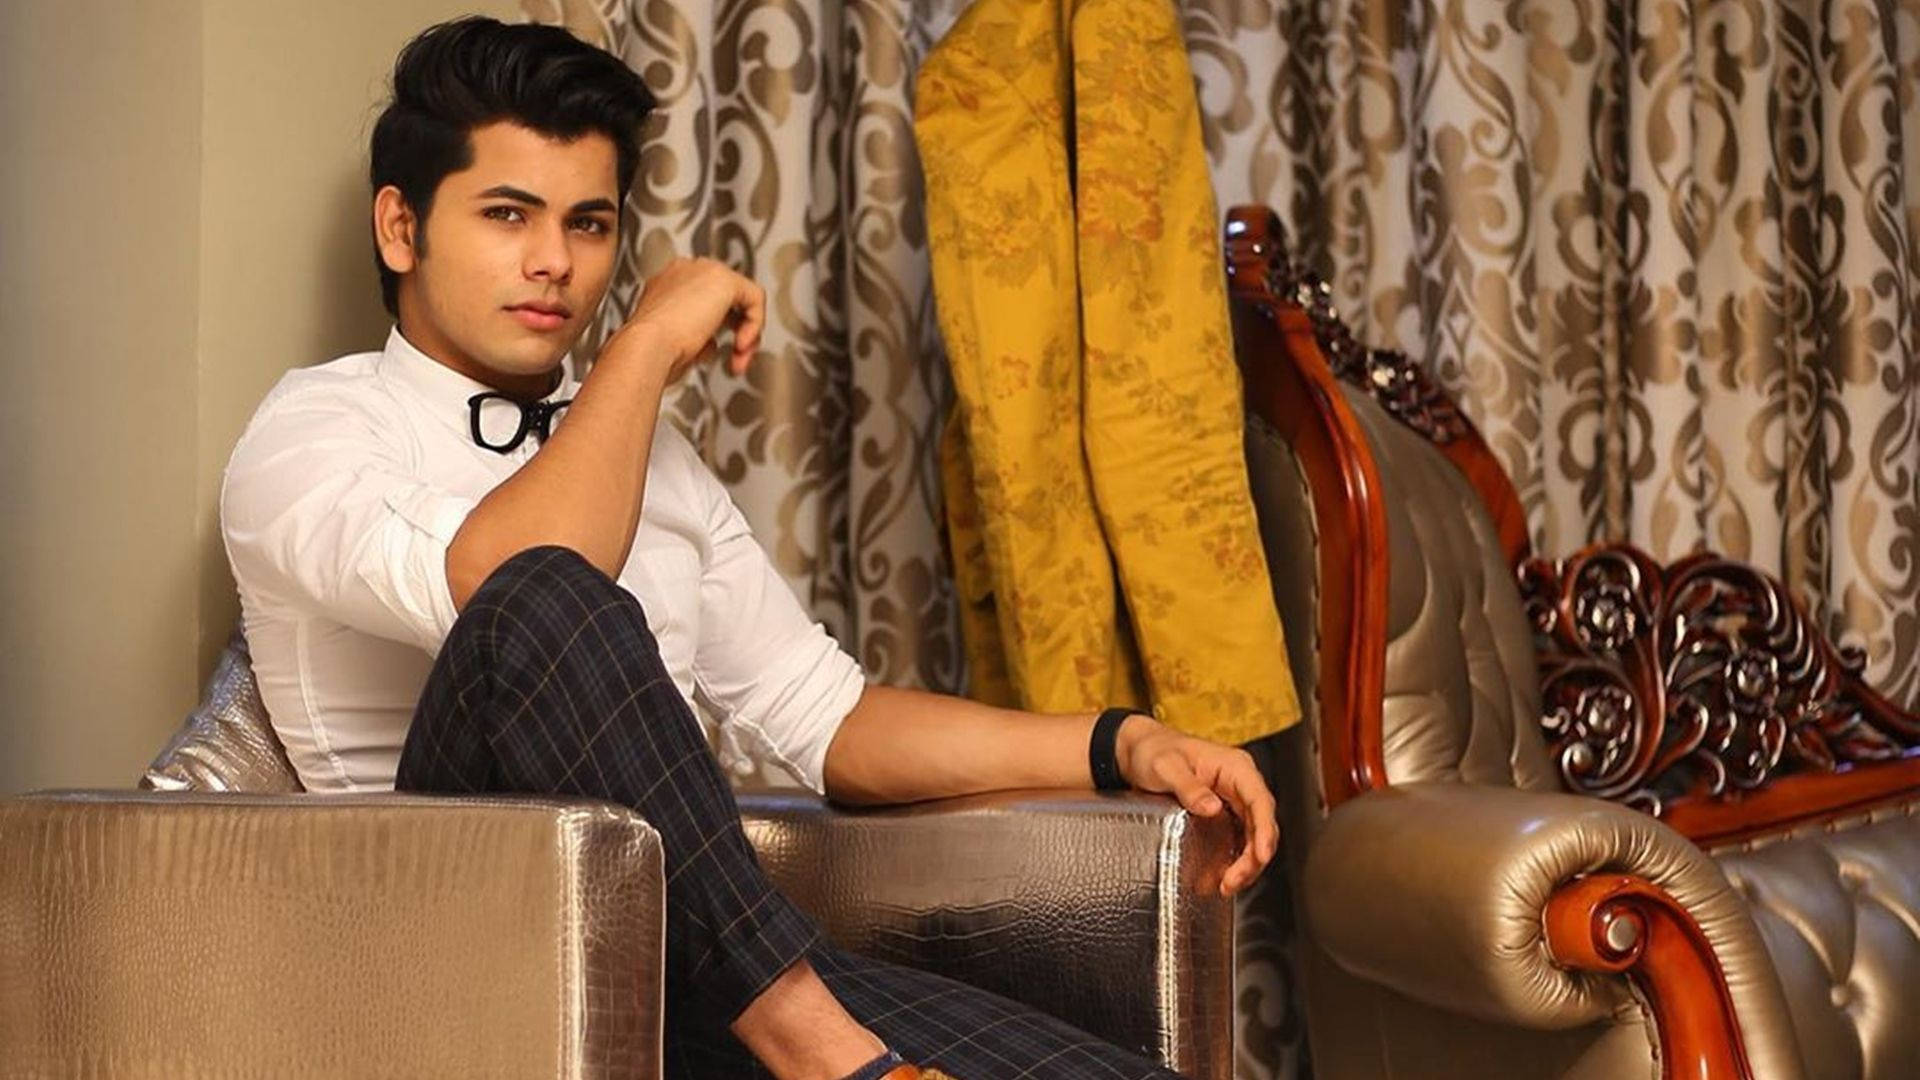 Dynamic Siddharth Nigam Captured in a Casual Moment Wallpaper